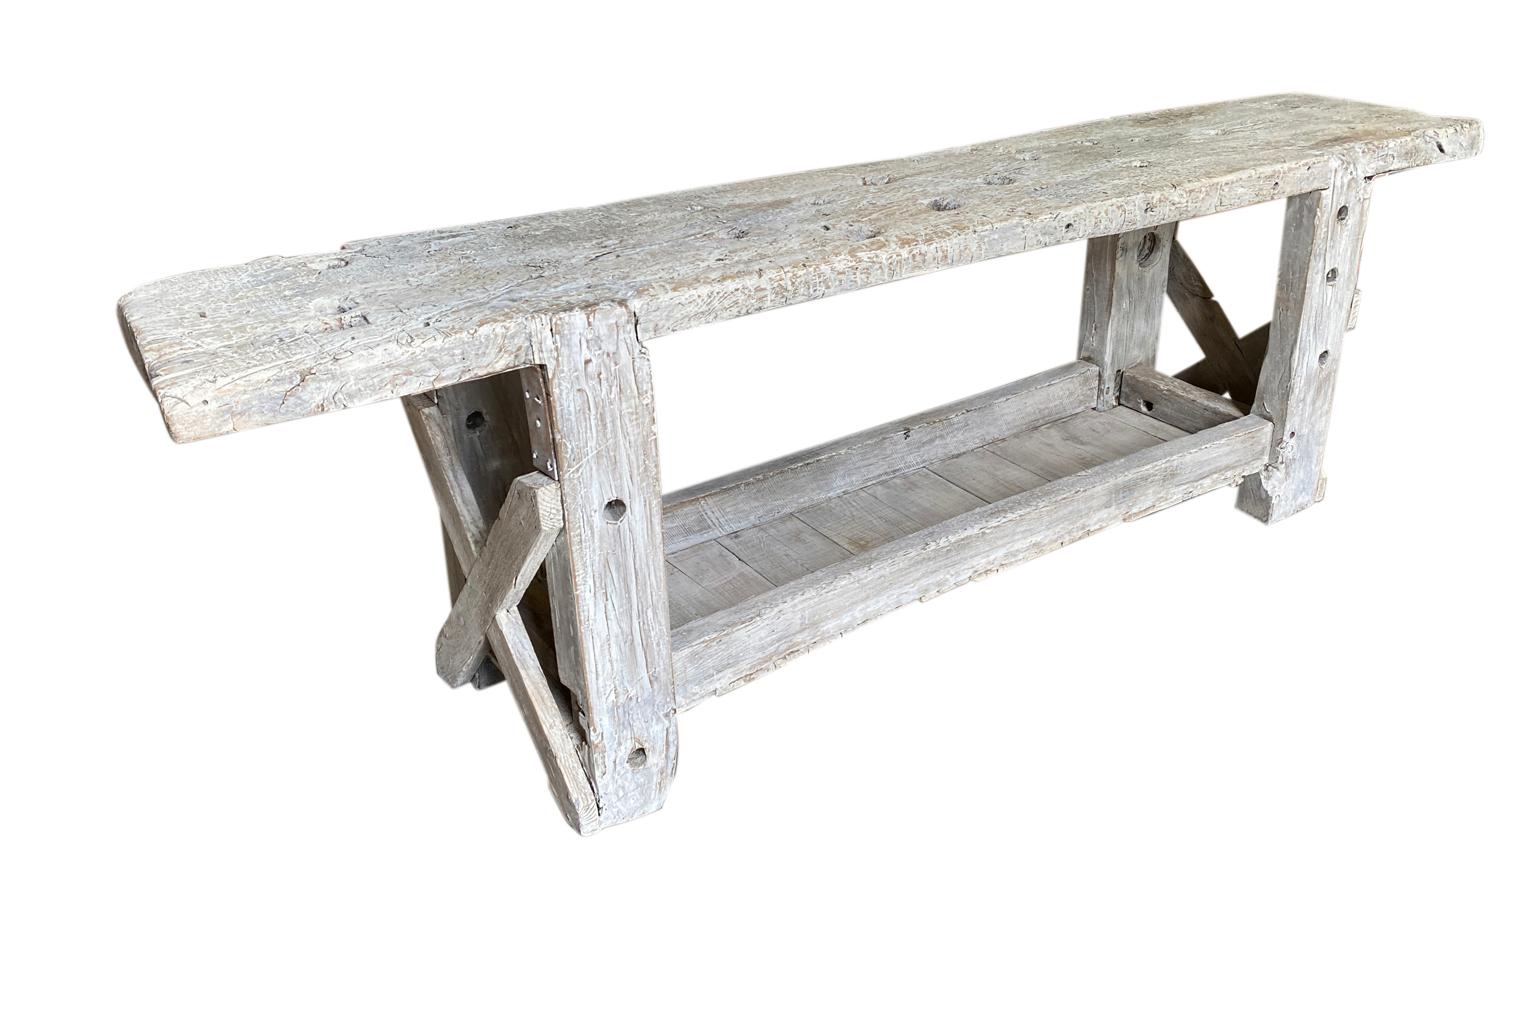 A fabulous 19th century grand scale Etabli - work table console from the Provence region of France. Soundly constructed from pine with a very thick top board. A perfect console for any modern or rustic environment.